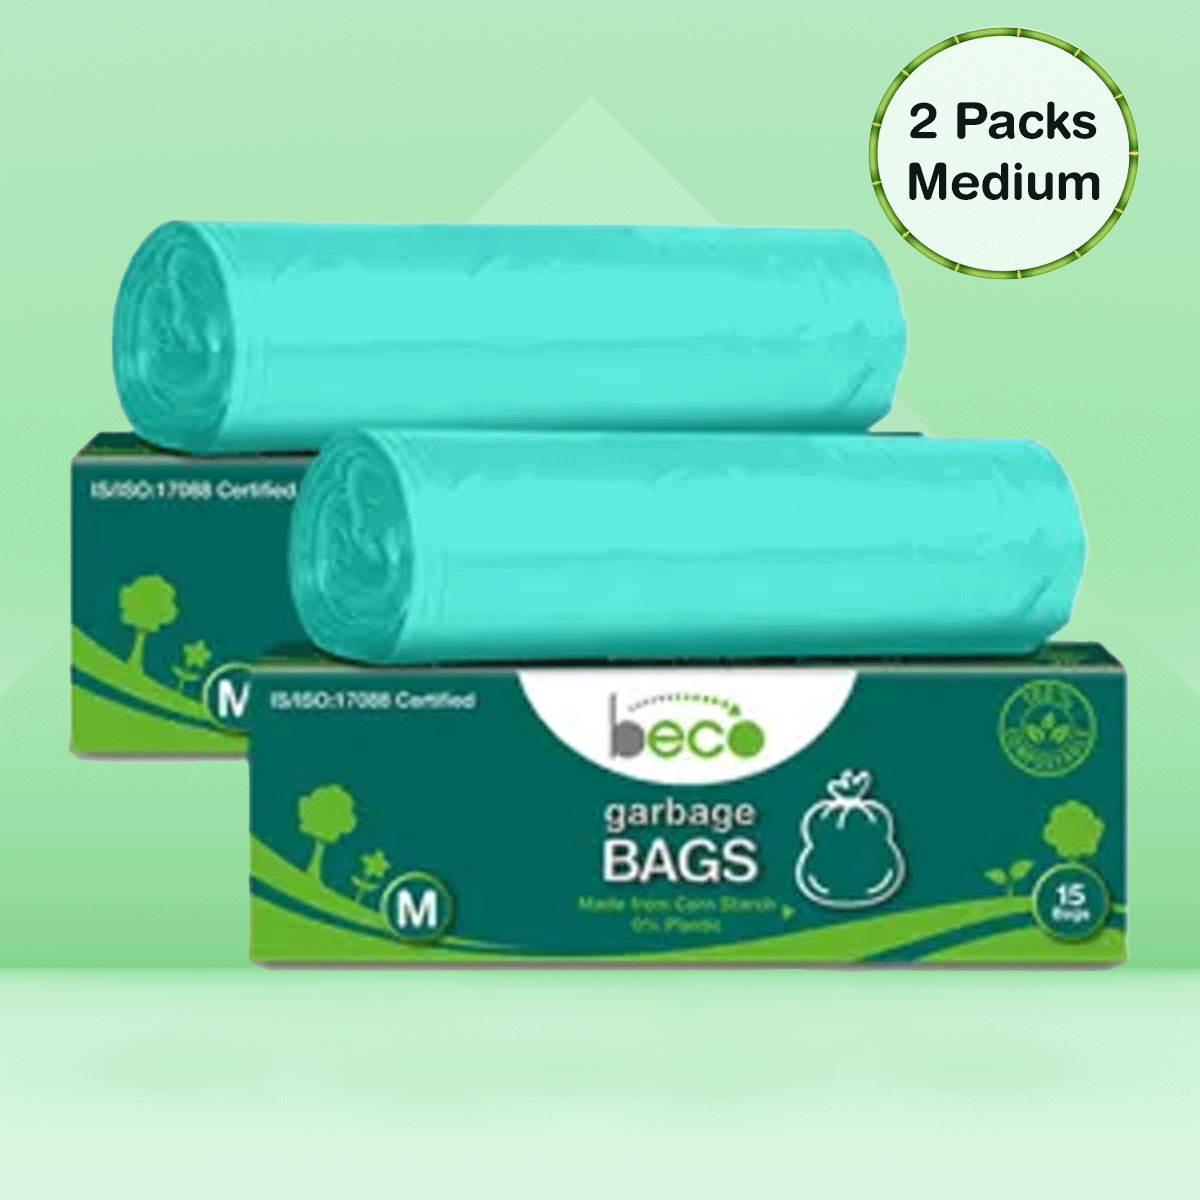 Biodegradable Garbage bags - Pack of 2